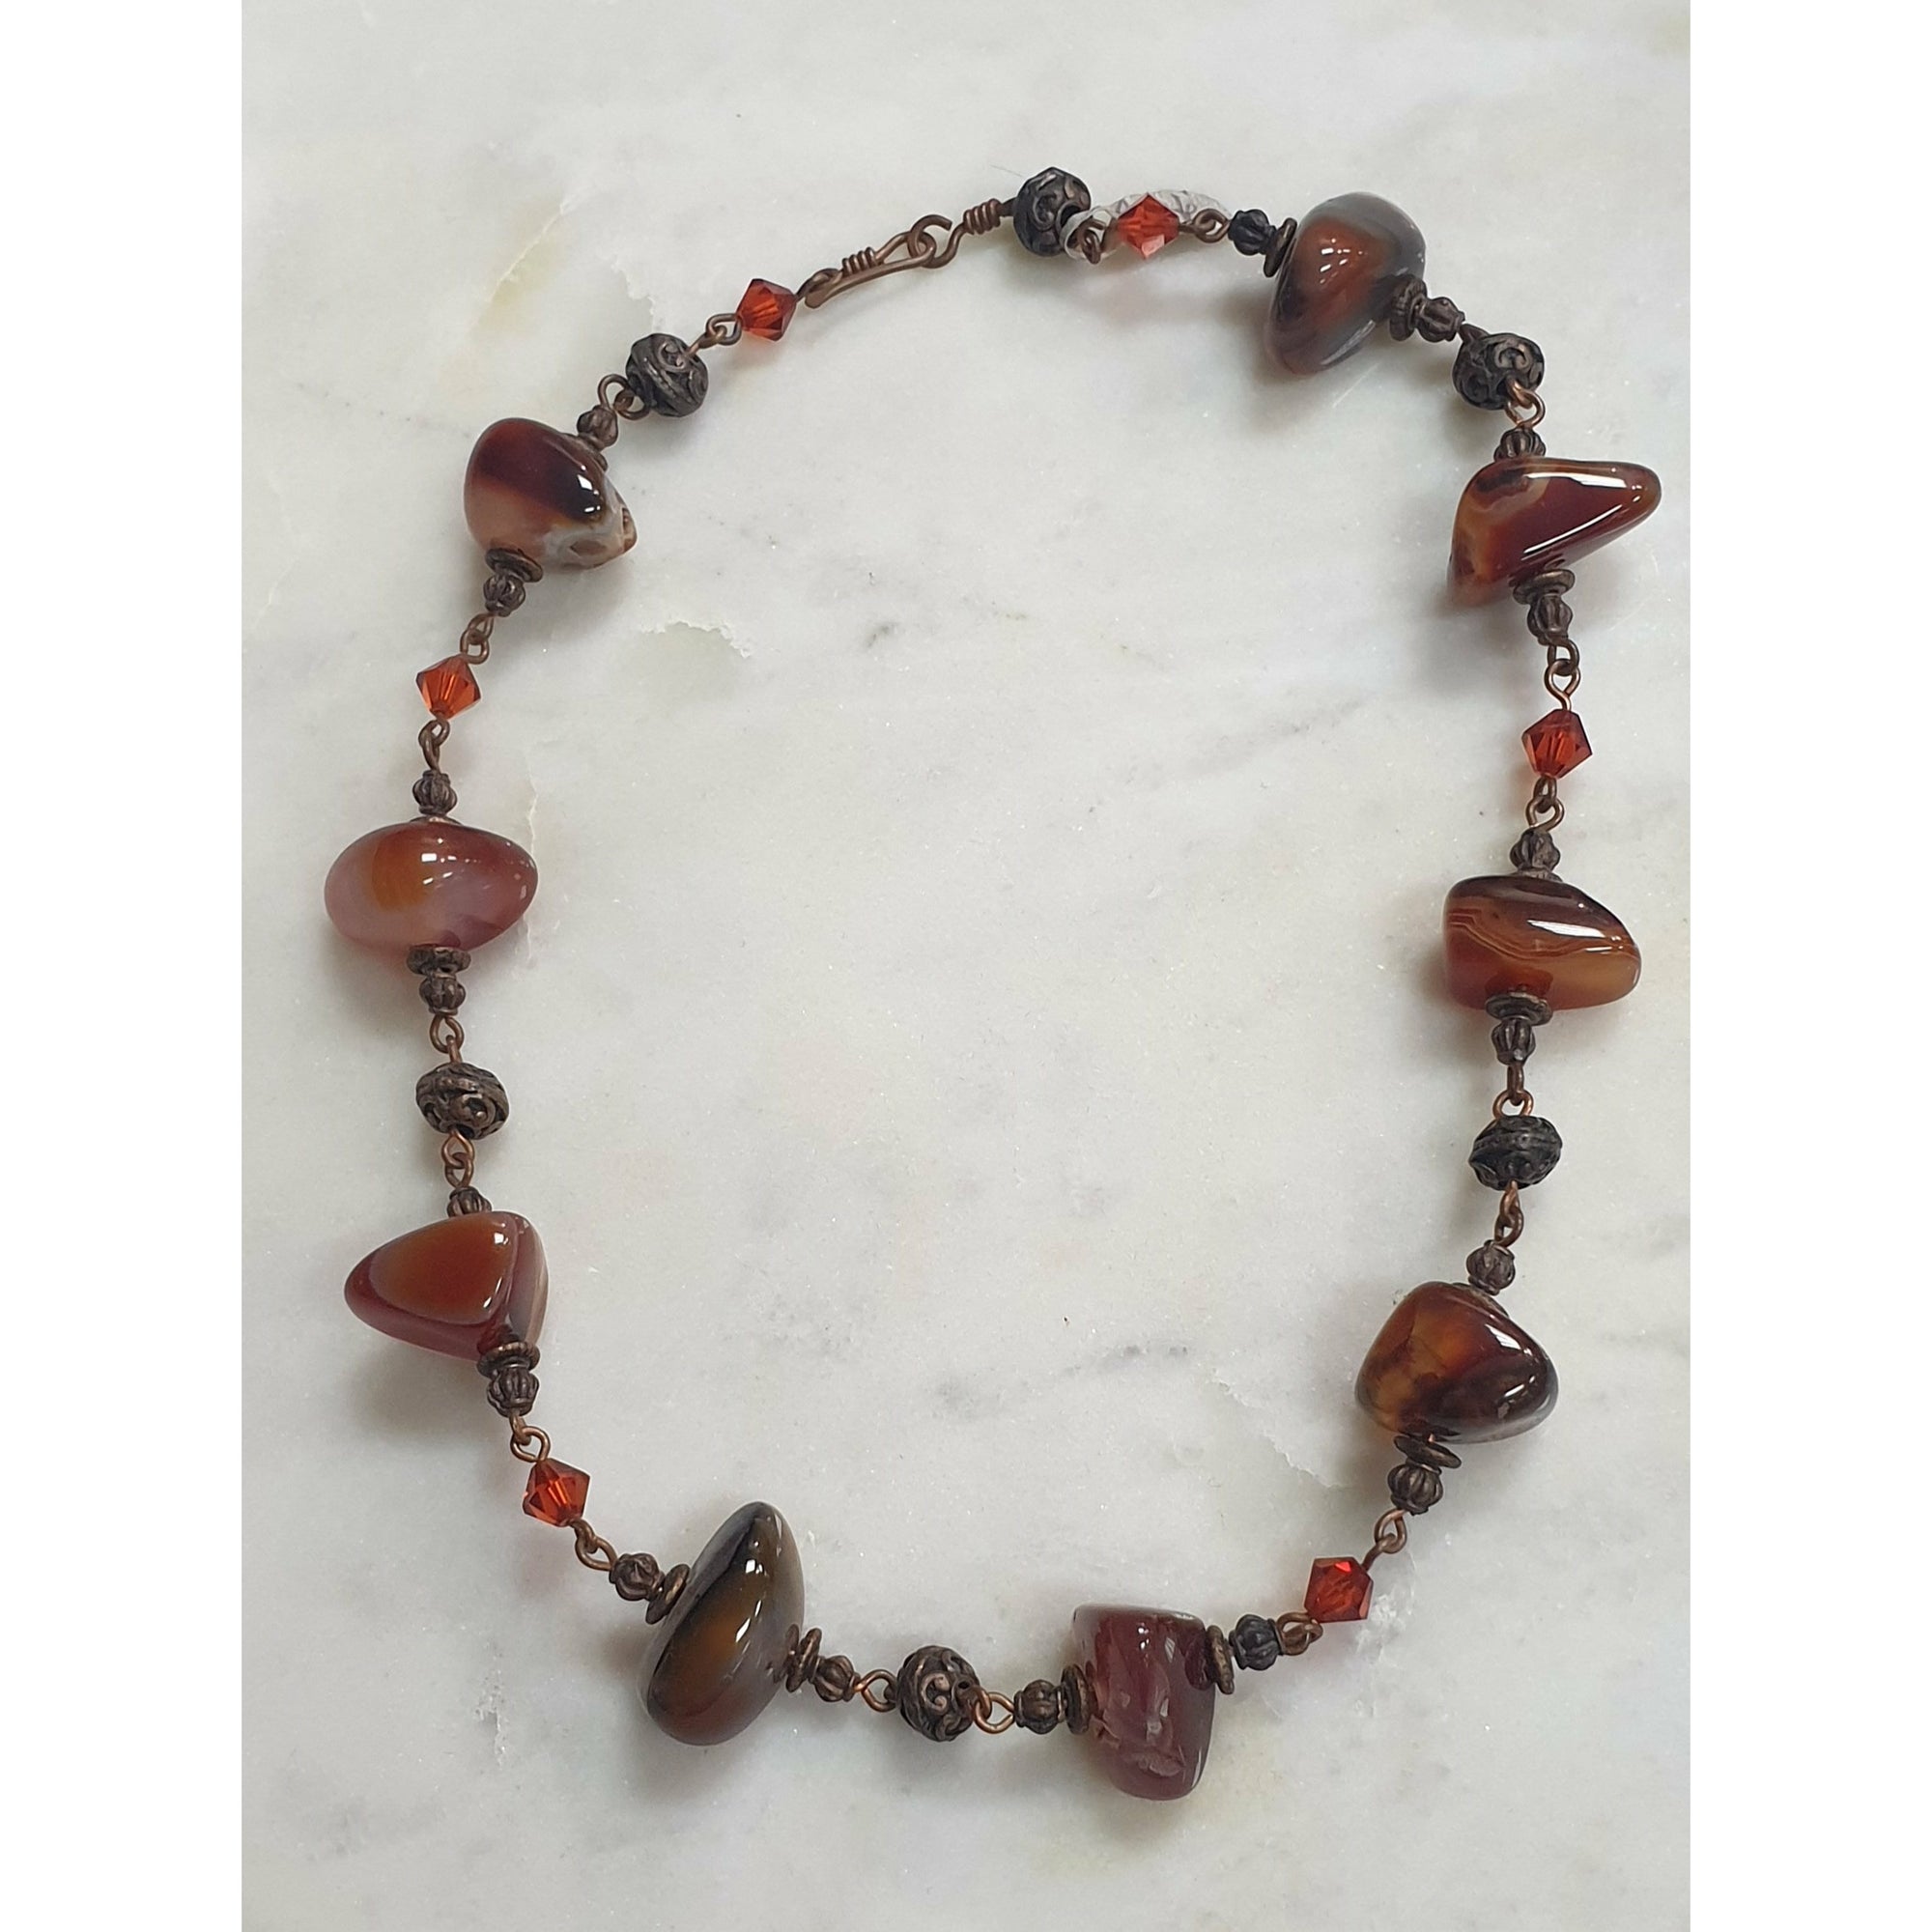 Agate Crystal Necklace Not specified